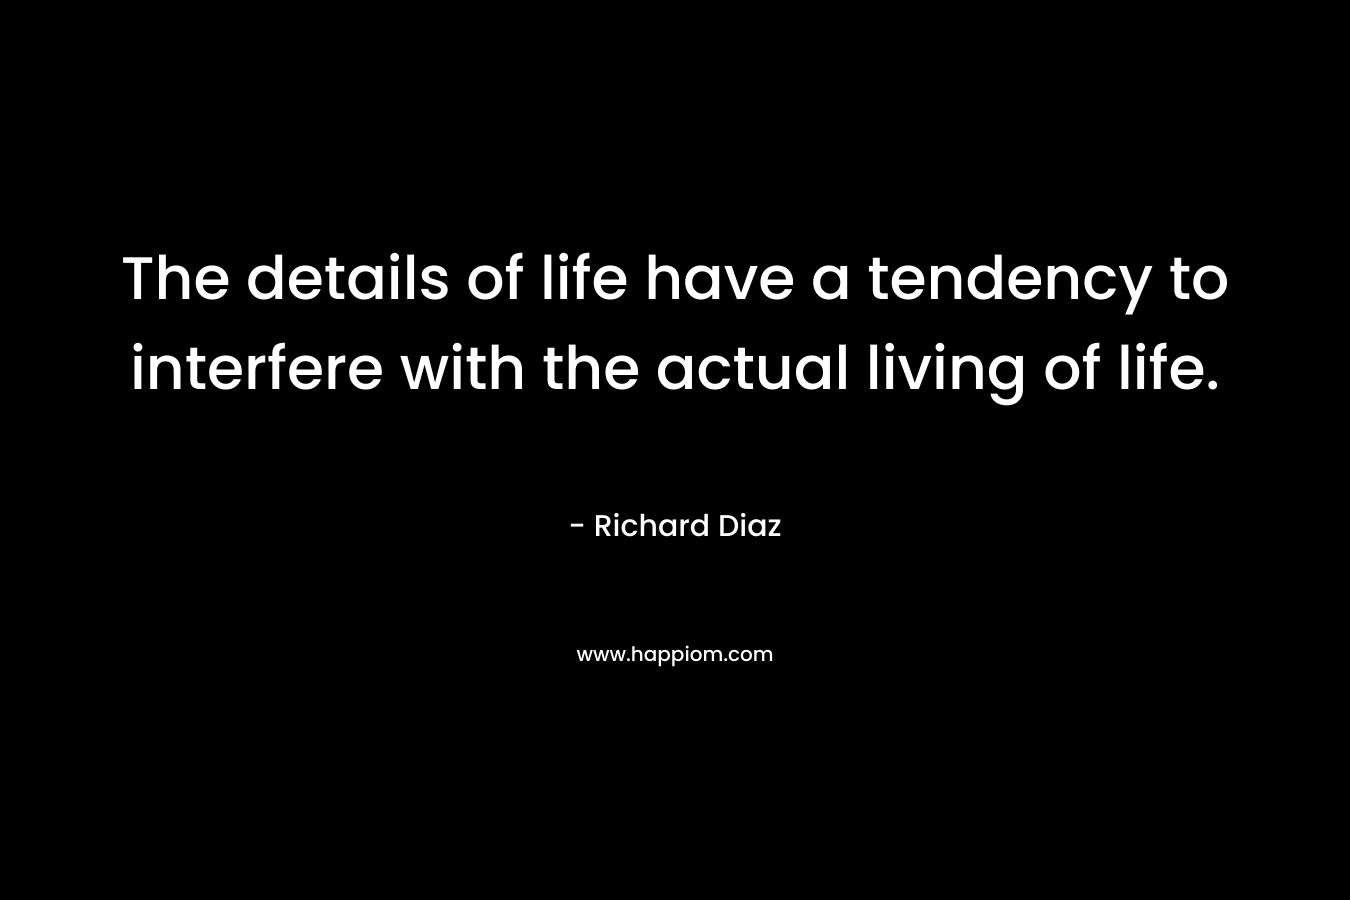 The details of life have a tendency to interfere with the actual living of life.